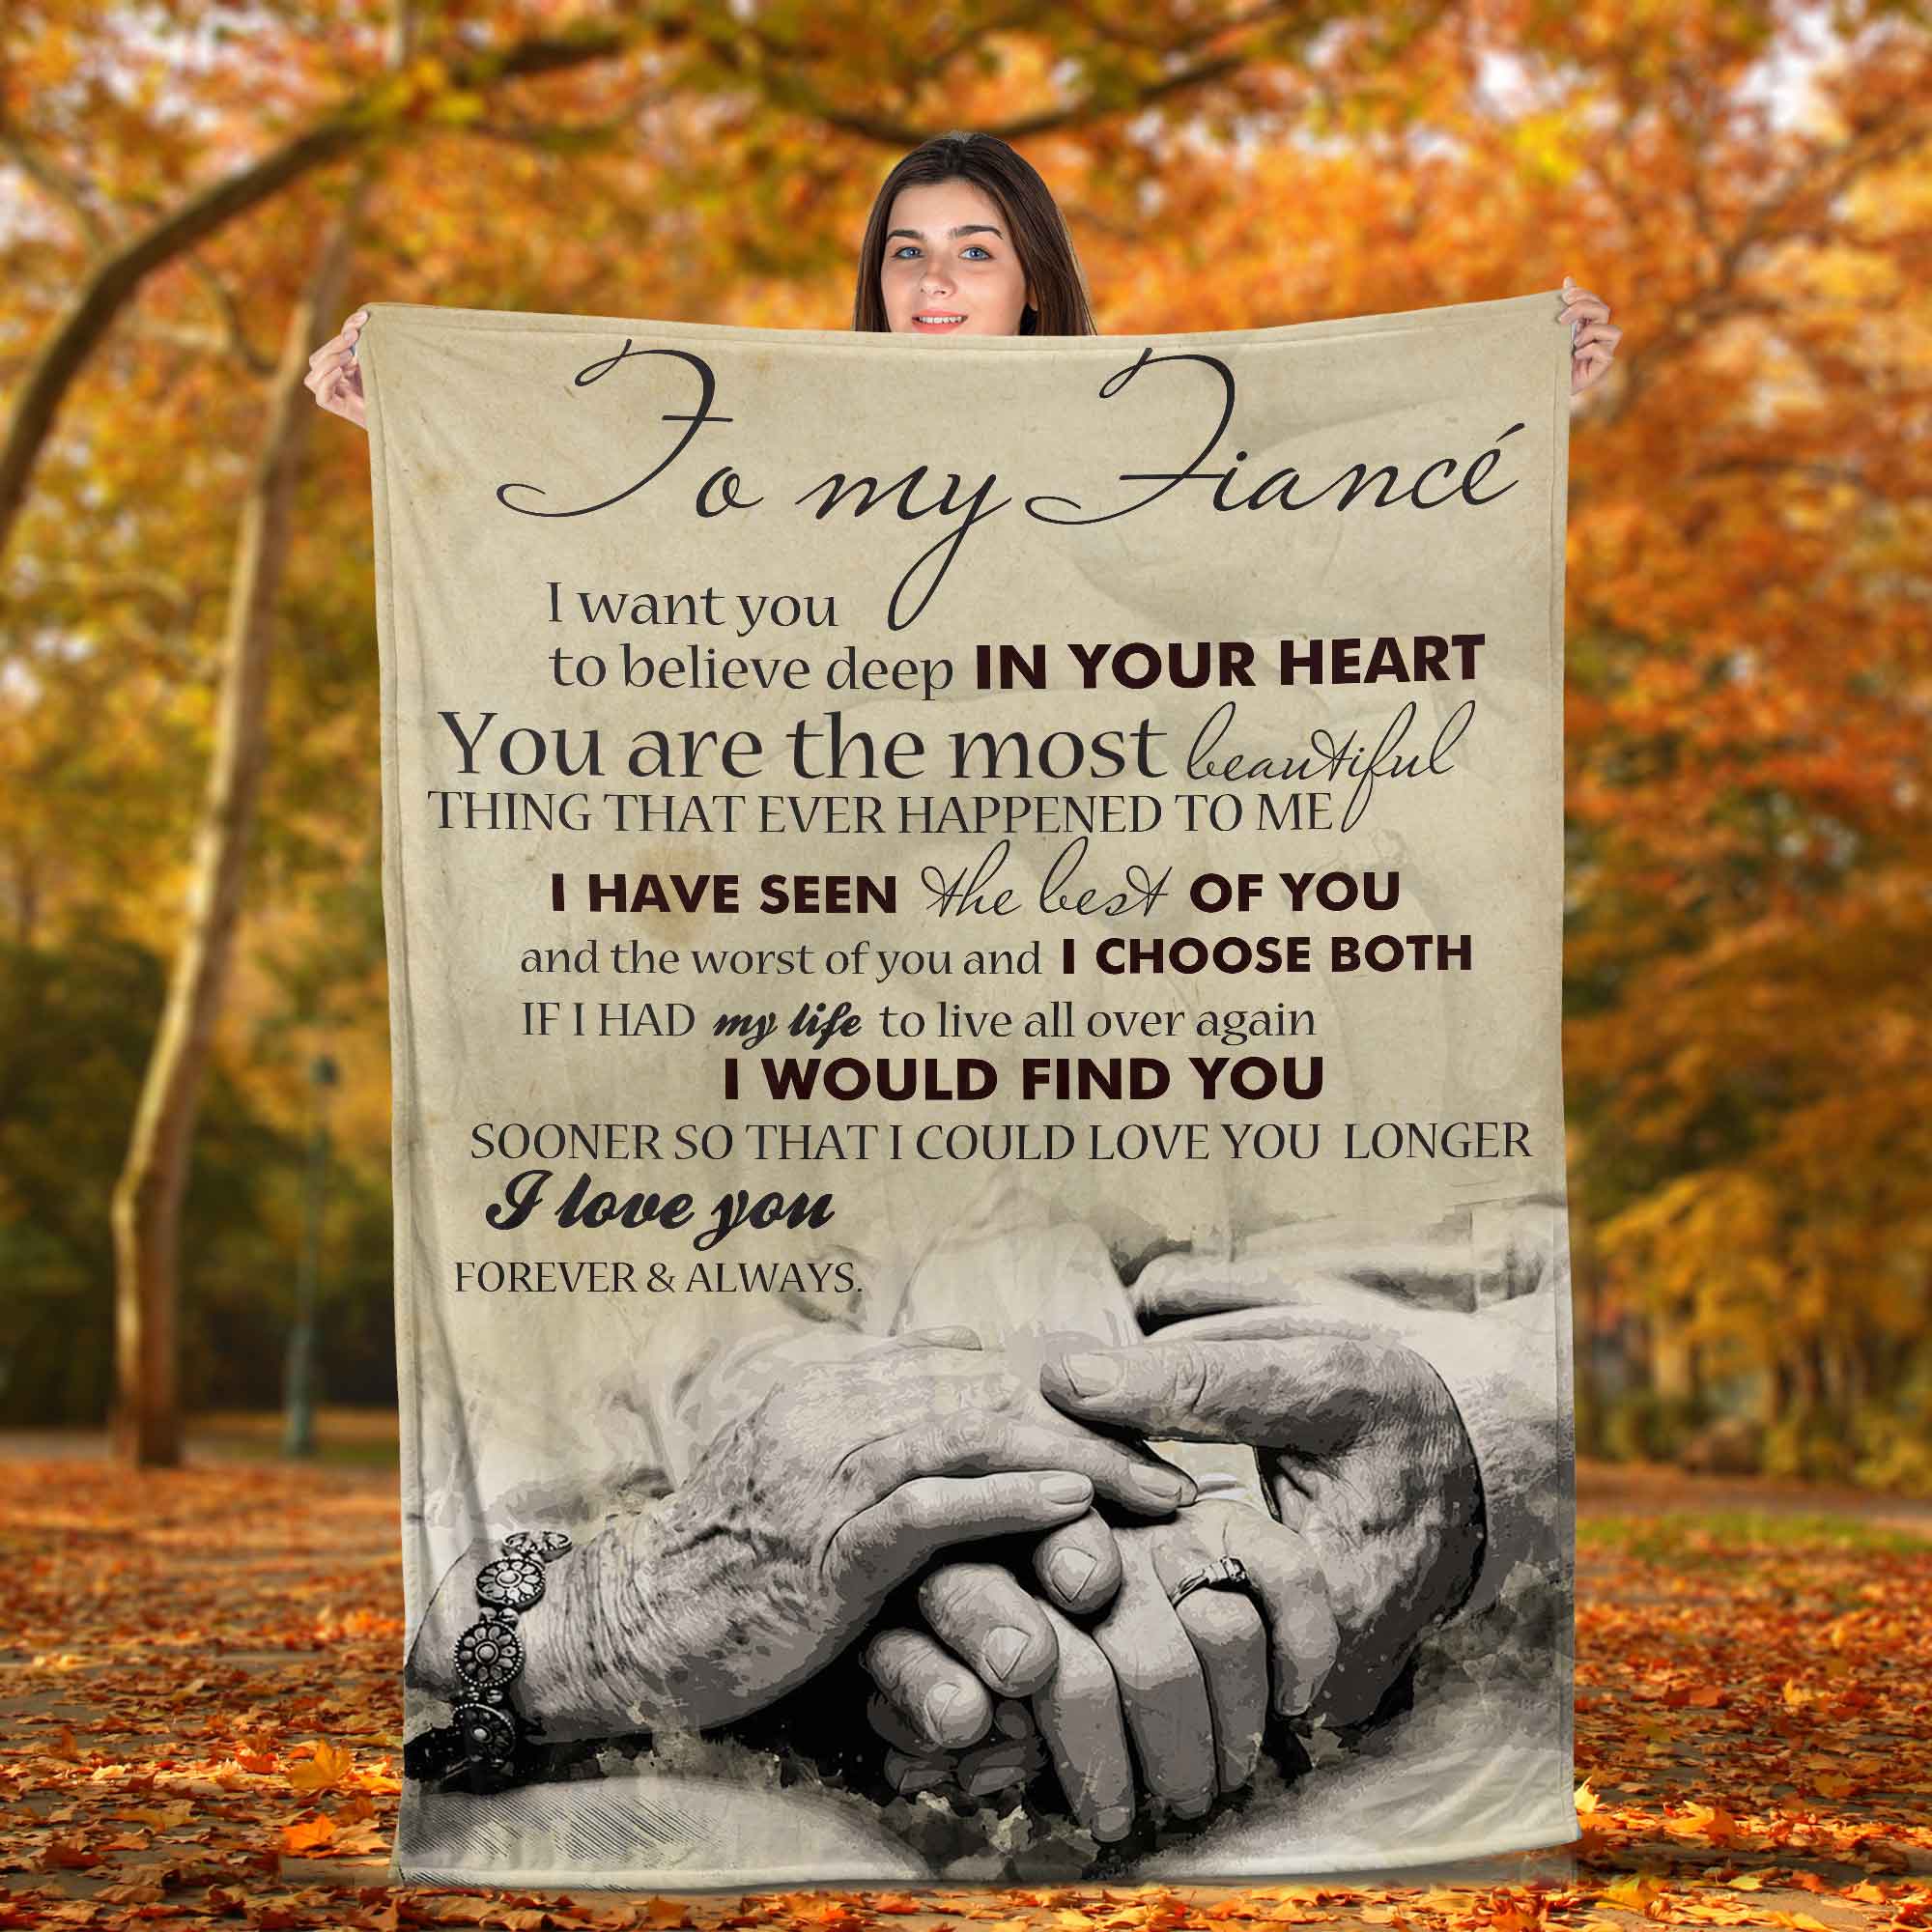 Skitongifts Blanket For Sofa Throws, Bed Throws blanket - To My Fiance I Want You To Believe Deep In Your Heart You Are The Most Beautiful-TT1301